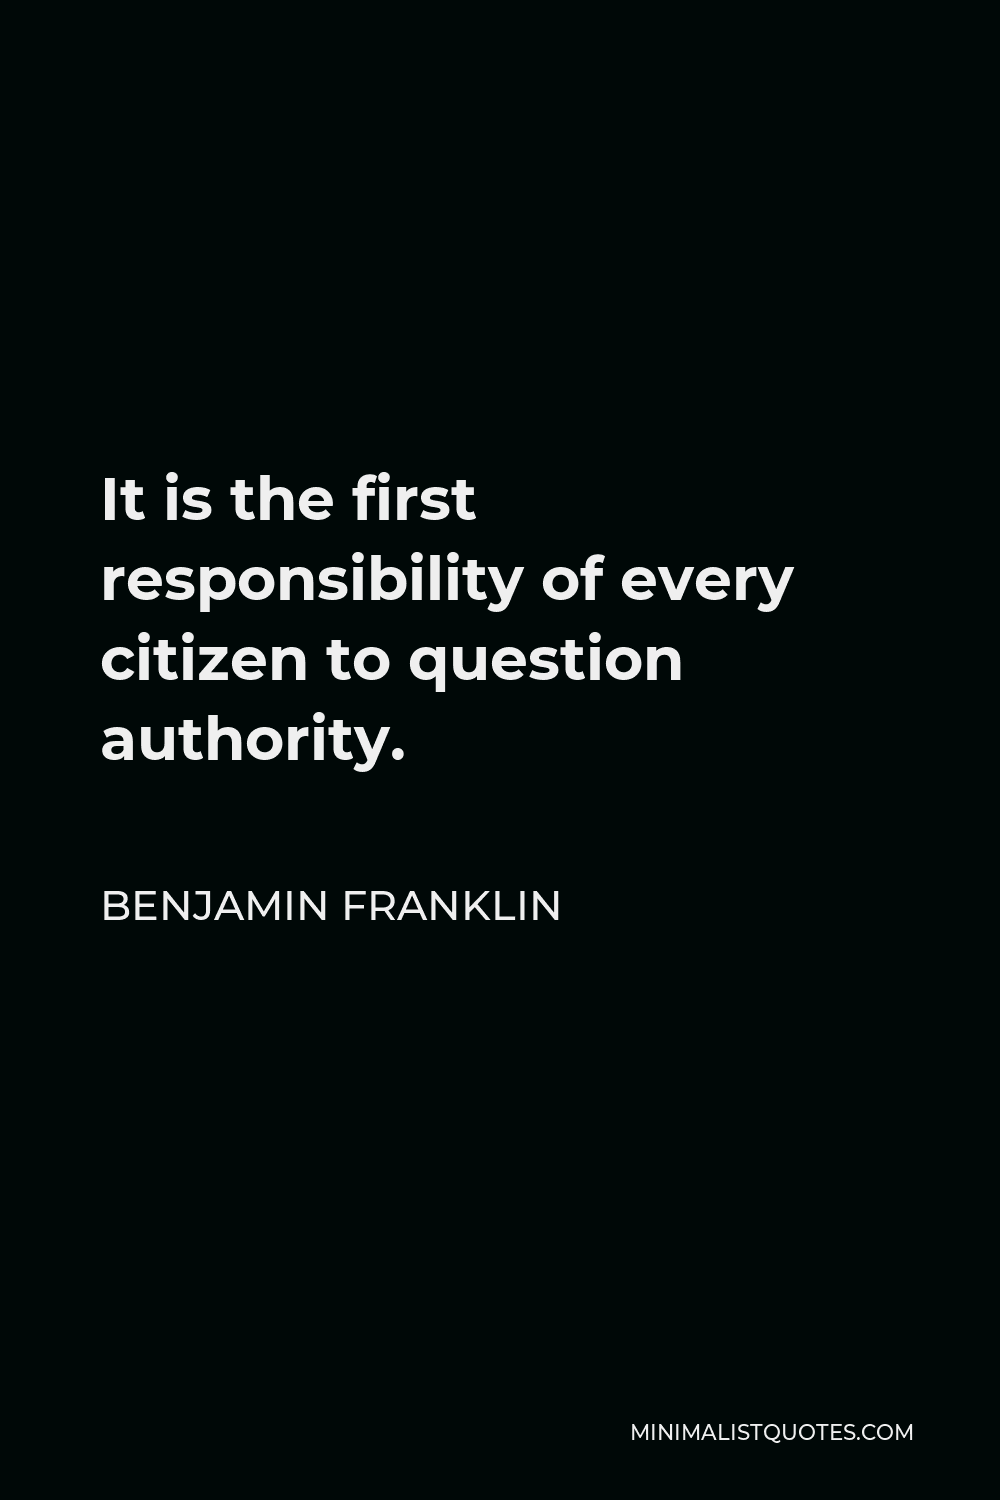 Benjamin Franklin Quote - It is the first responsibility of every citizen to question authority.